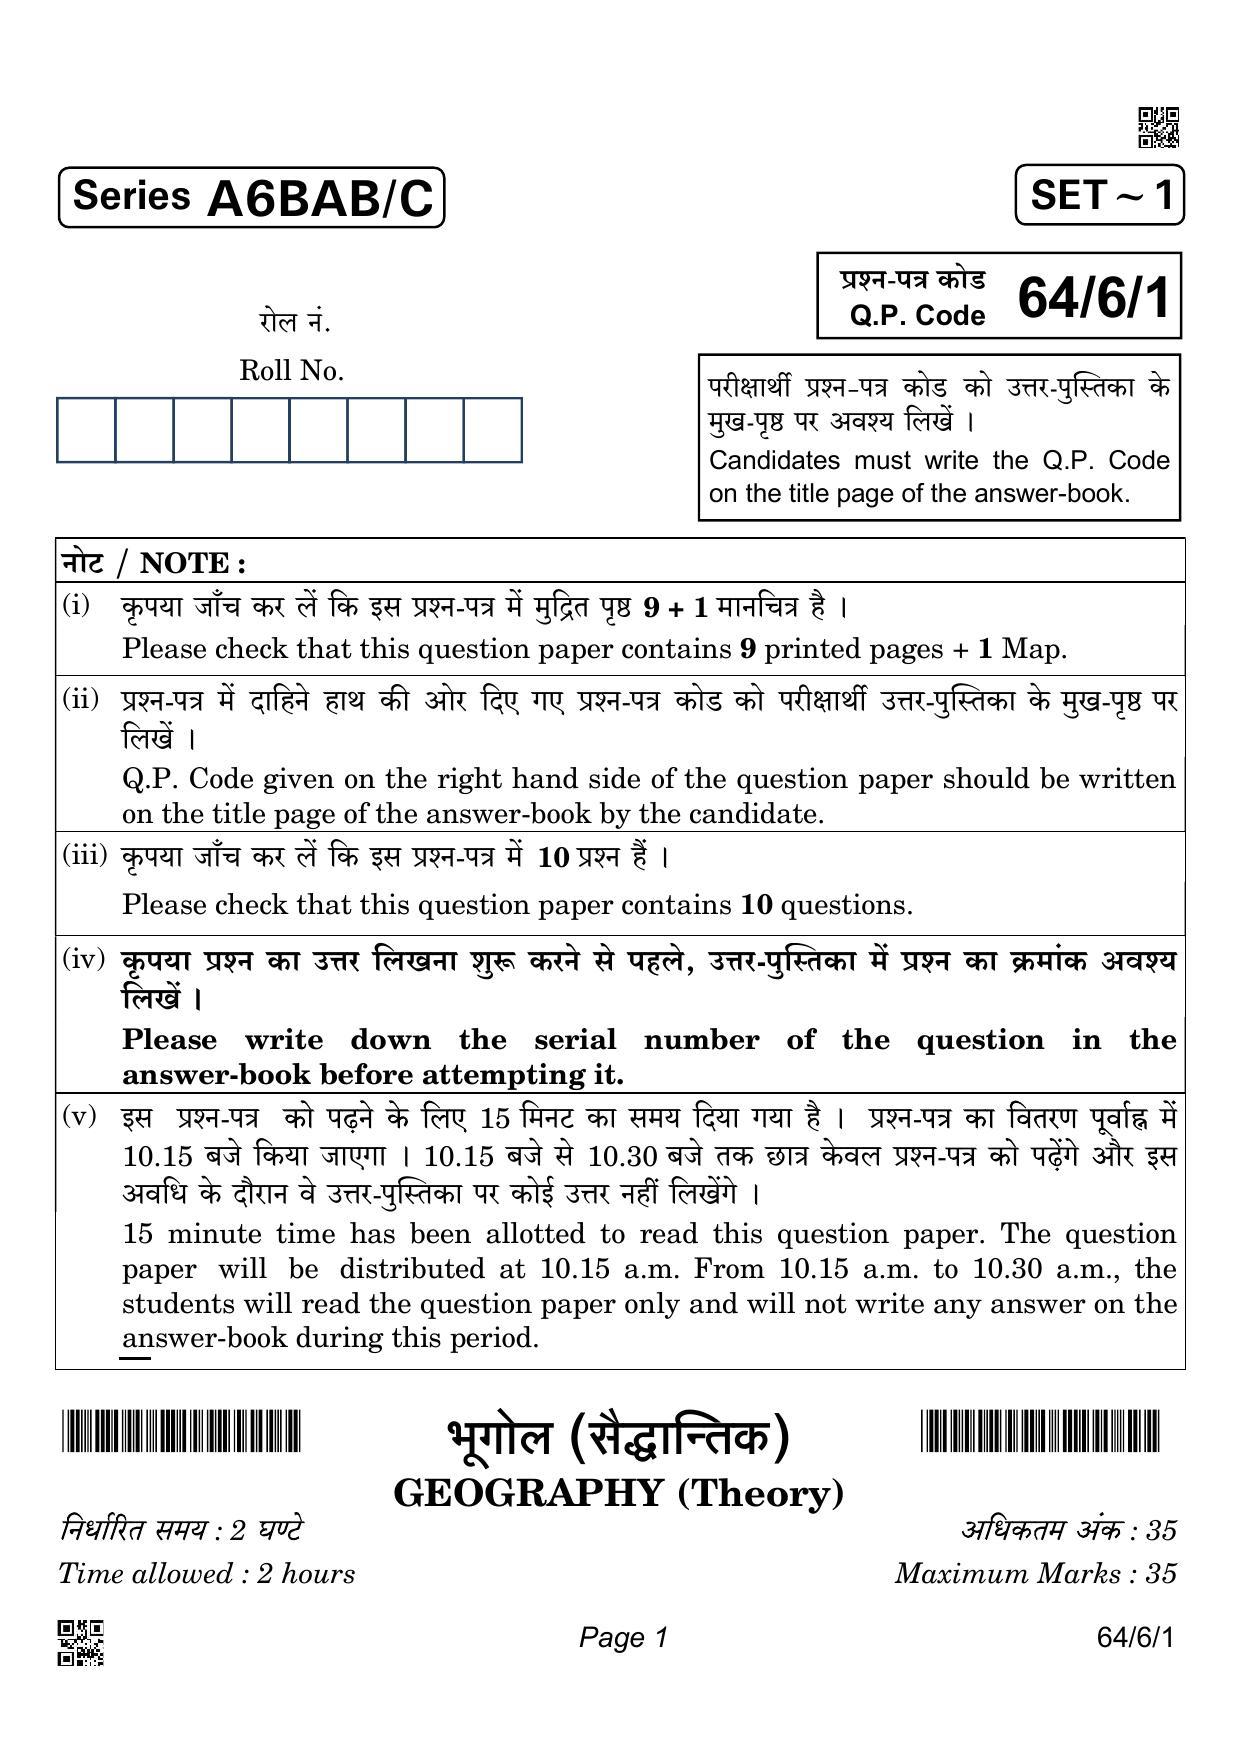 CBSE Class 12 64-6-1 GEOGRAPHY 2022 Compartment Question Paper - Page 1